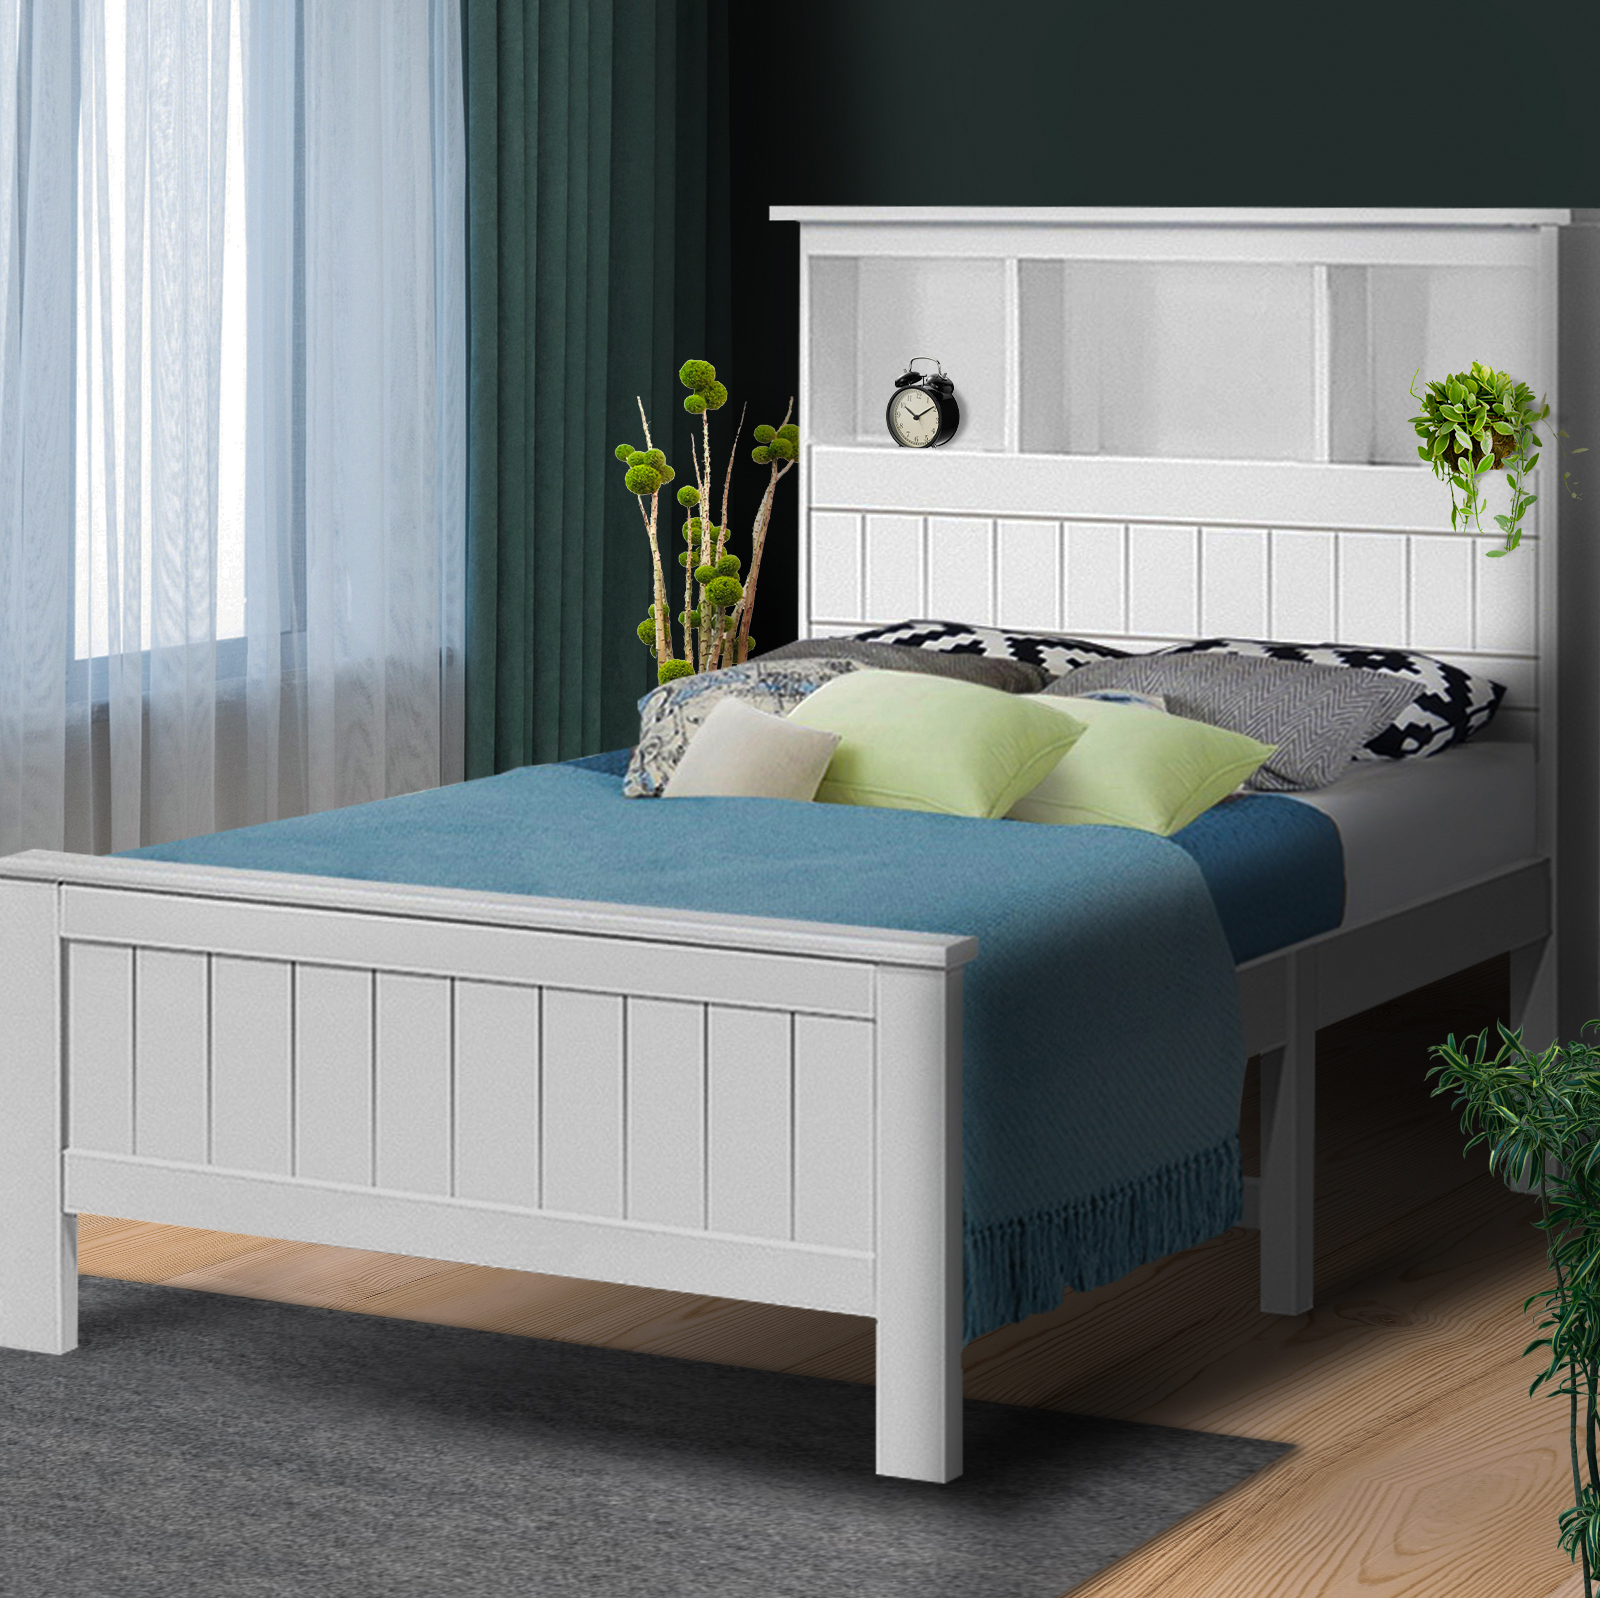 Artiss Bed Frame King Single Size Wooden with 3 Shelves Bed Head White